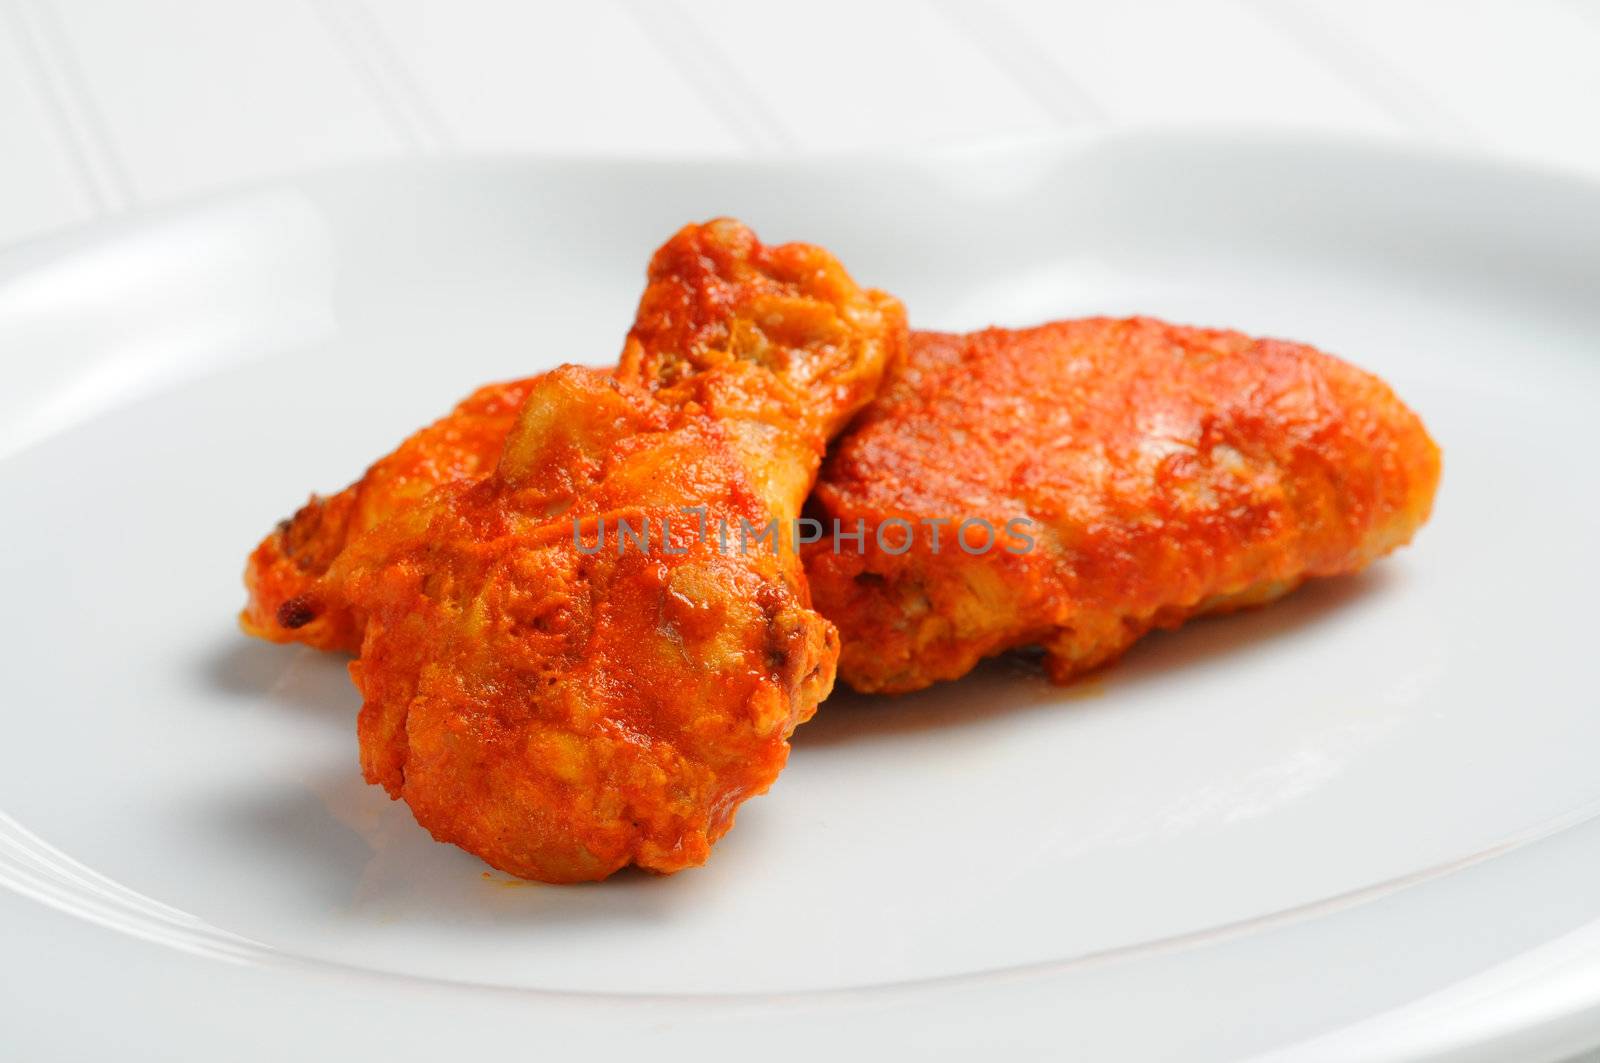 Hot and spicy buffalo style chicken wings.